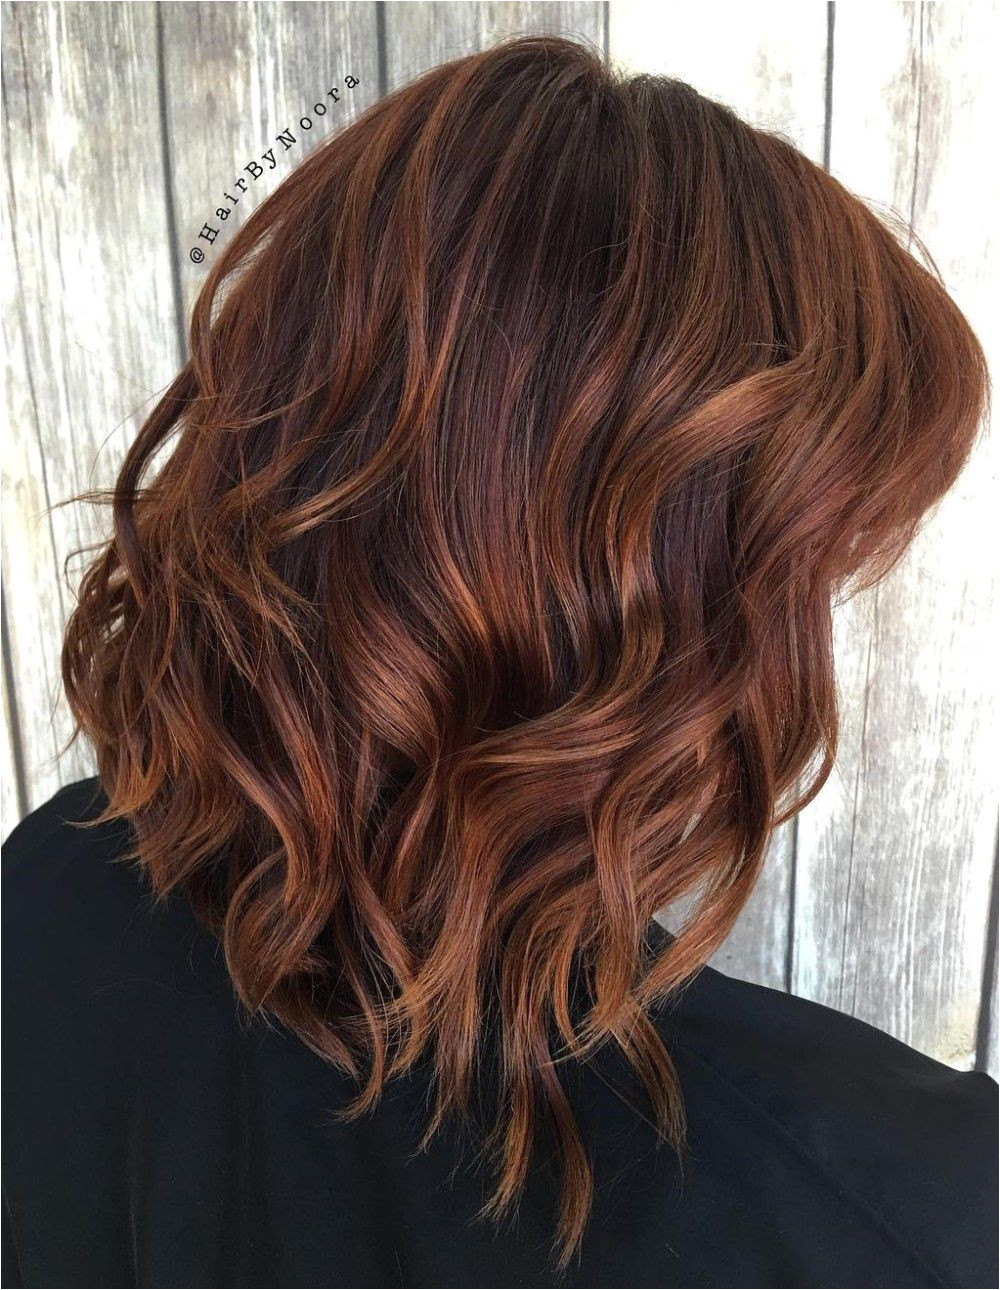 Hairstyles Black with Red Highlights 40 Unique Ways to Make Your Chestnut Brown Hair Pop